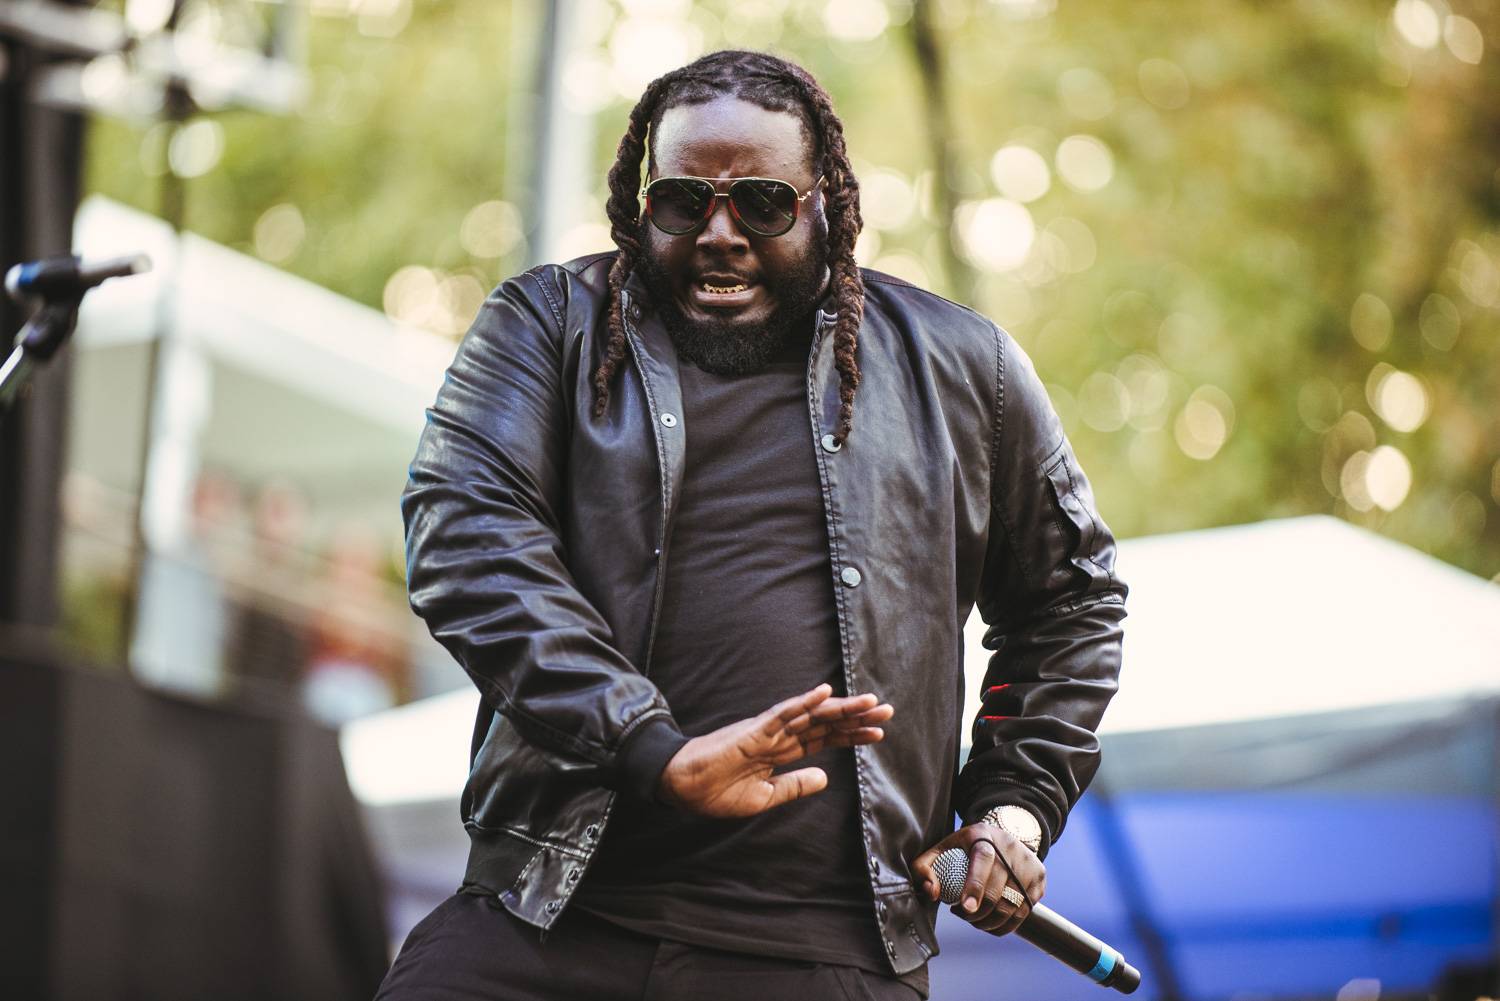 T-Pain at the Bumbershoot Music Festival 2018 - Day 2. Sept 1 2018. Pavel Boiko photo.